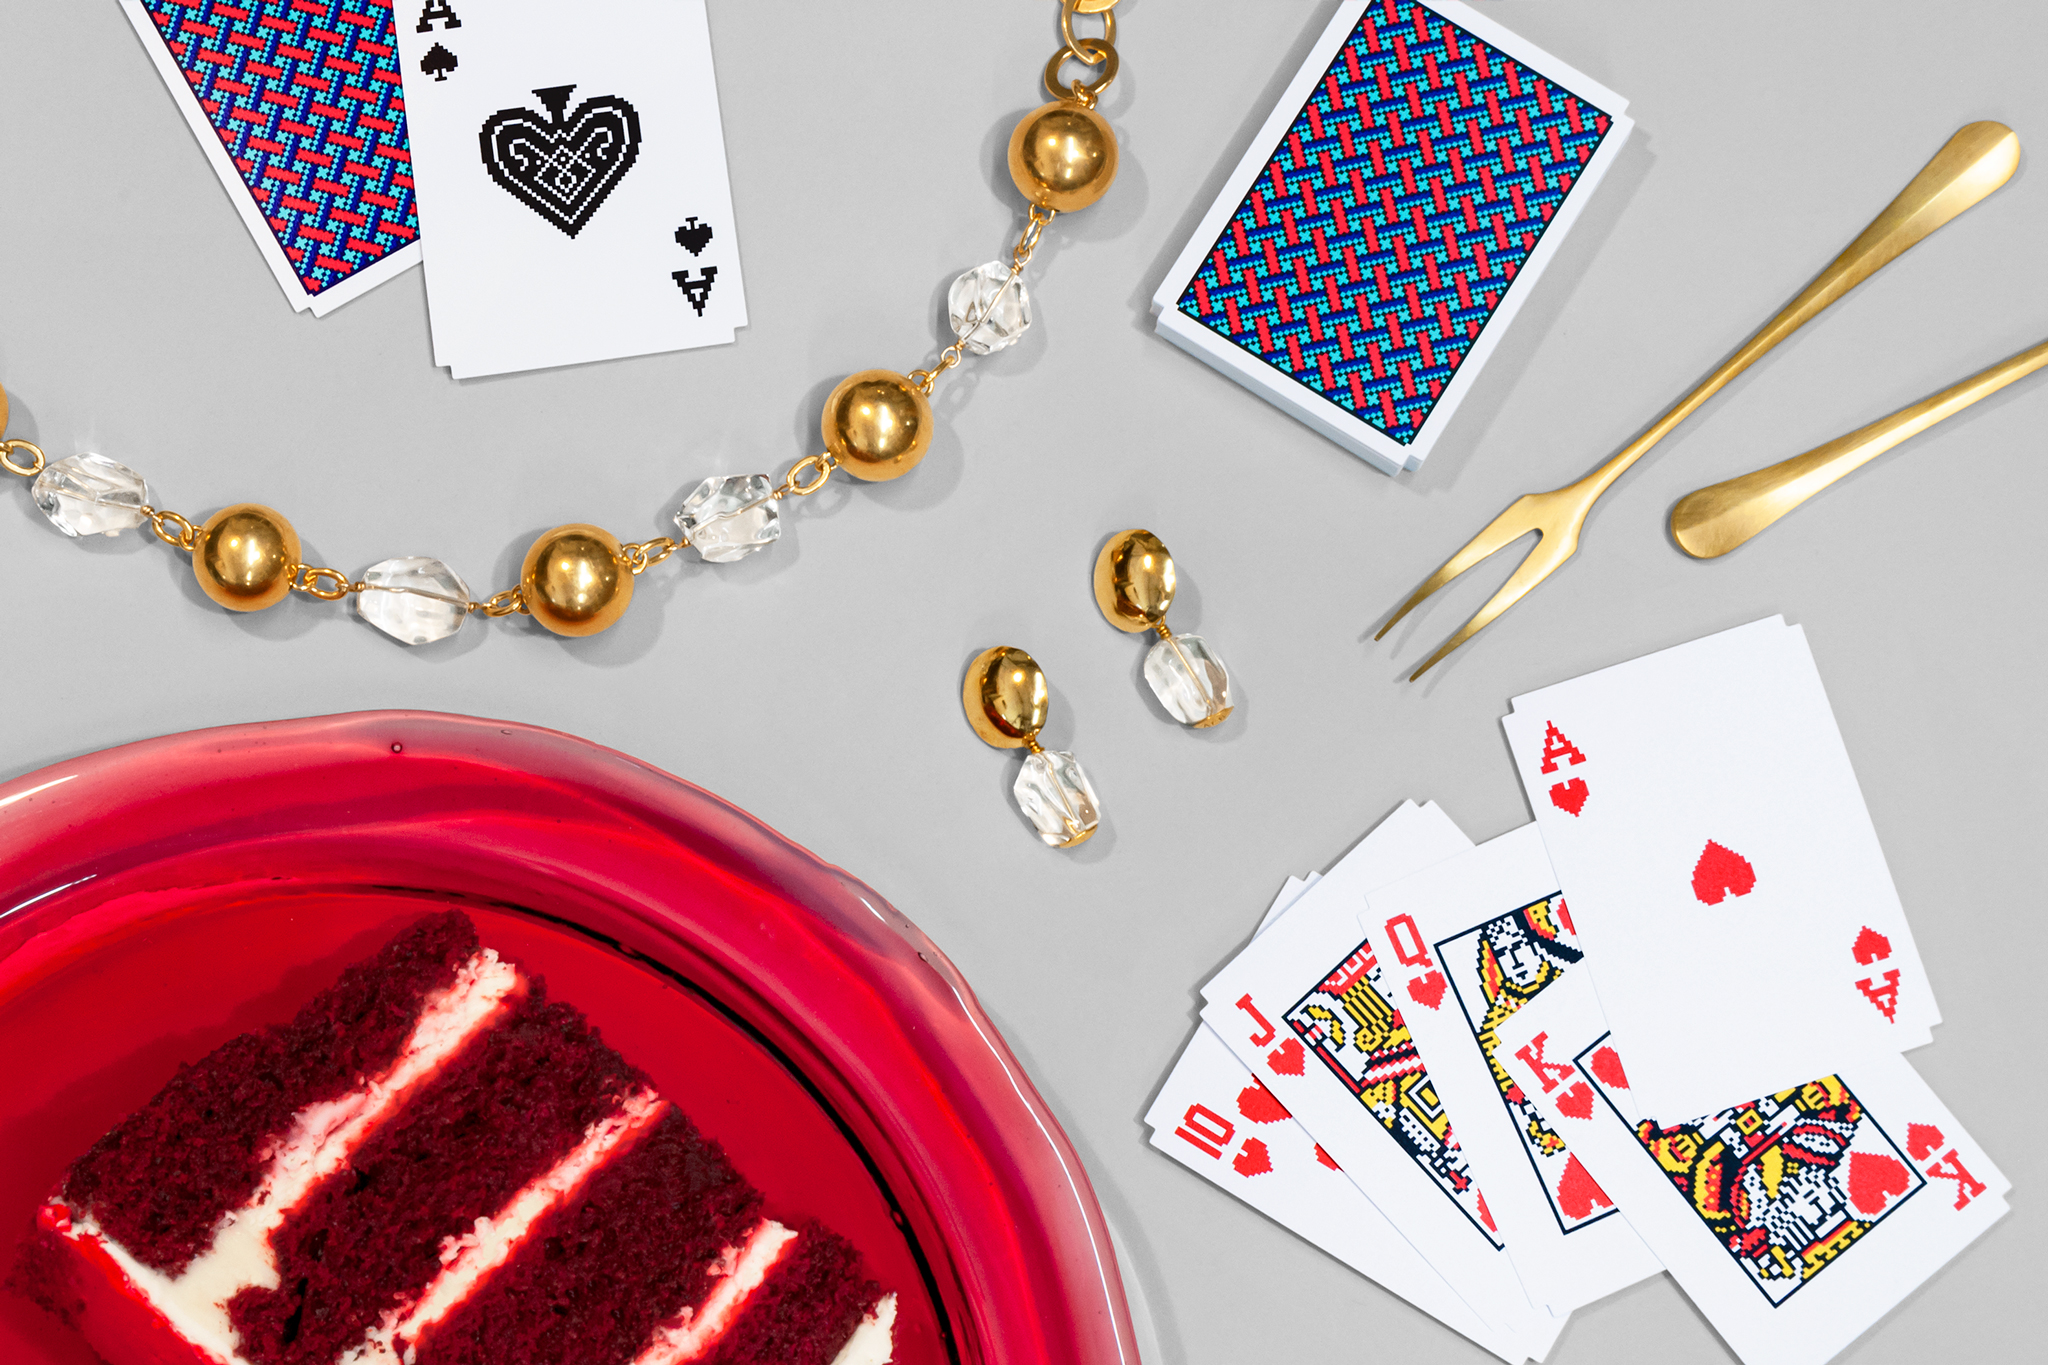 Scattered across a gray background: gold and quartz bauble jewelry, playing cards, brass serving utensils, and a resin tray with a slice of red velvet cake on it.